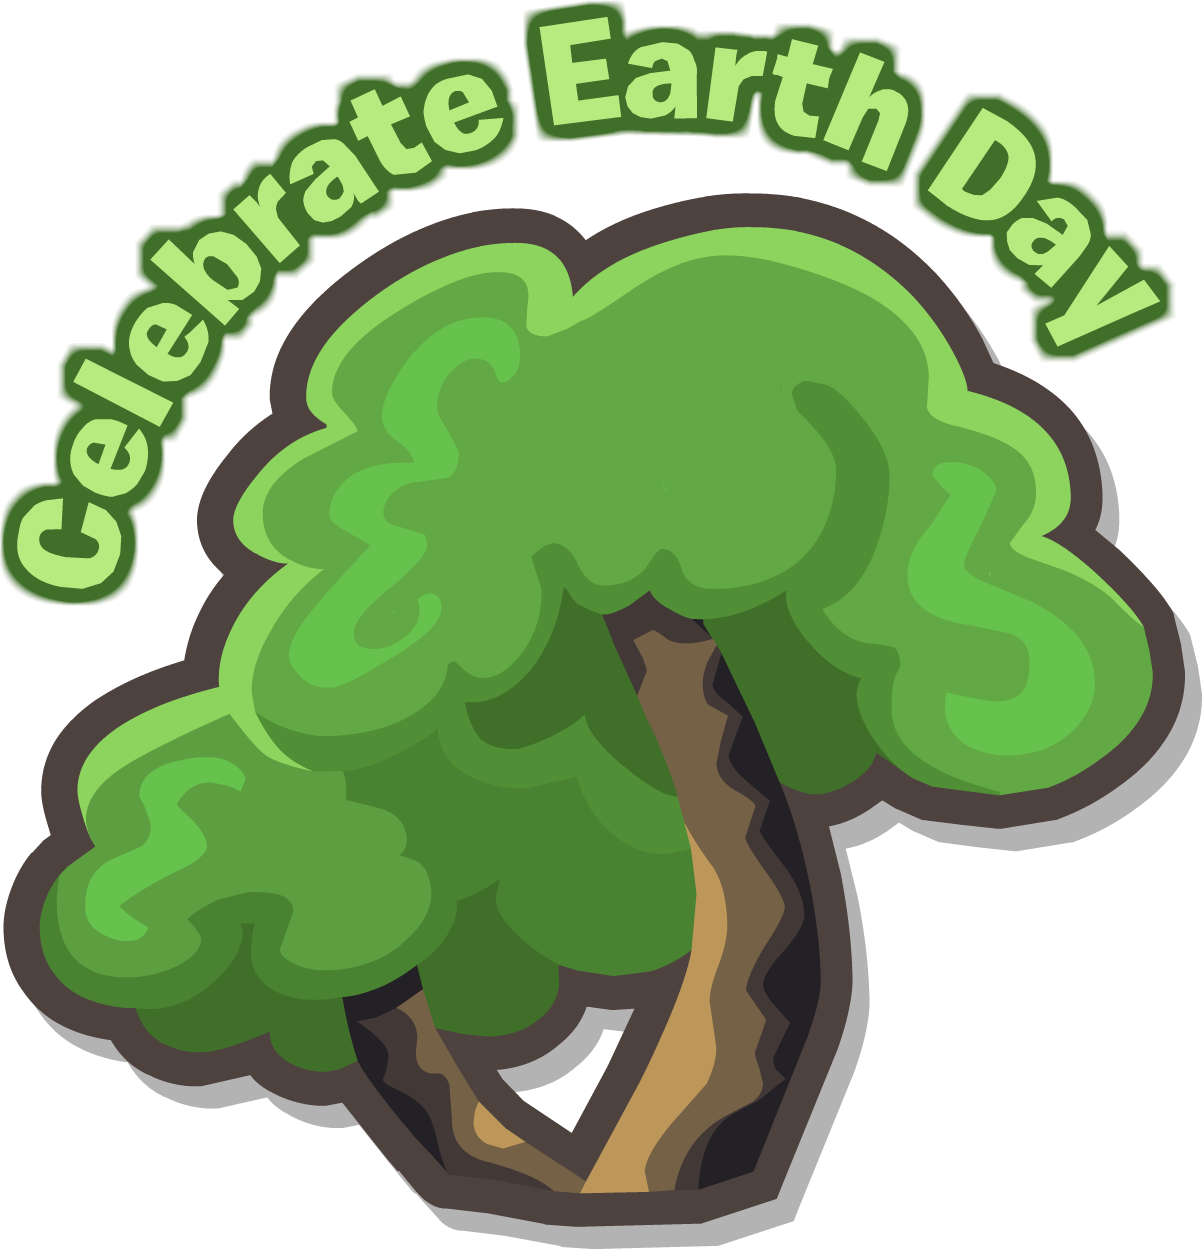 Earth Day Party - Club Penguin Earth Day (1202x1249)